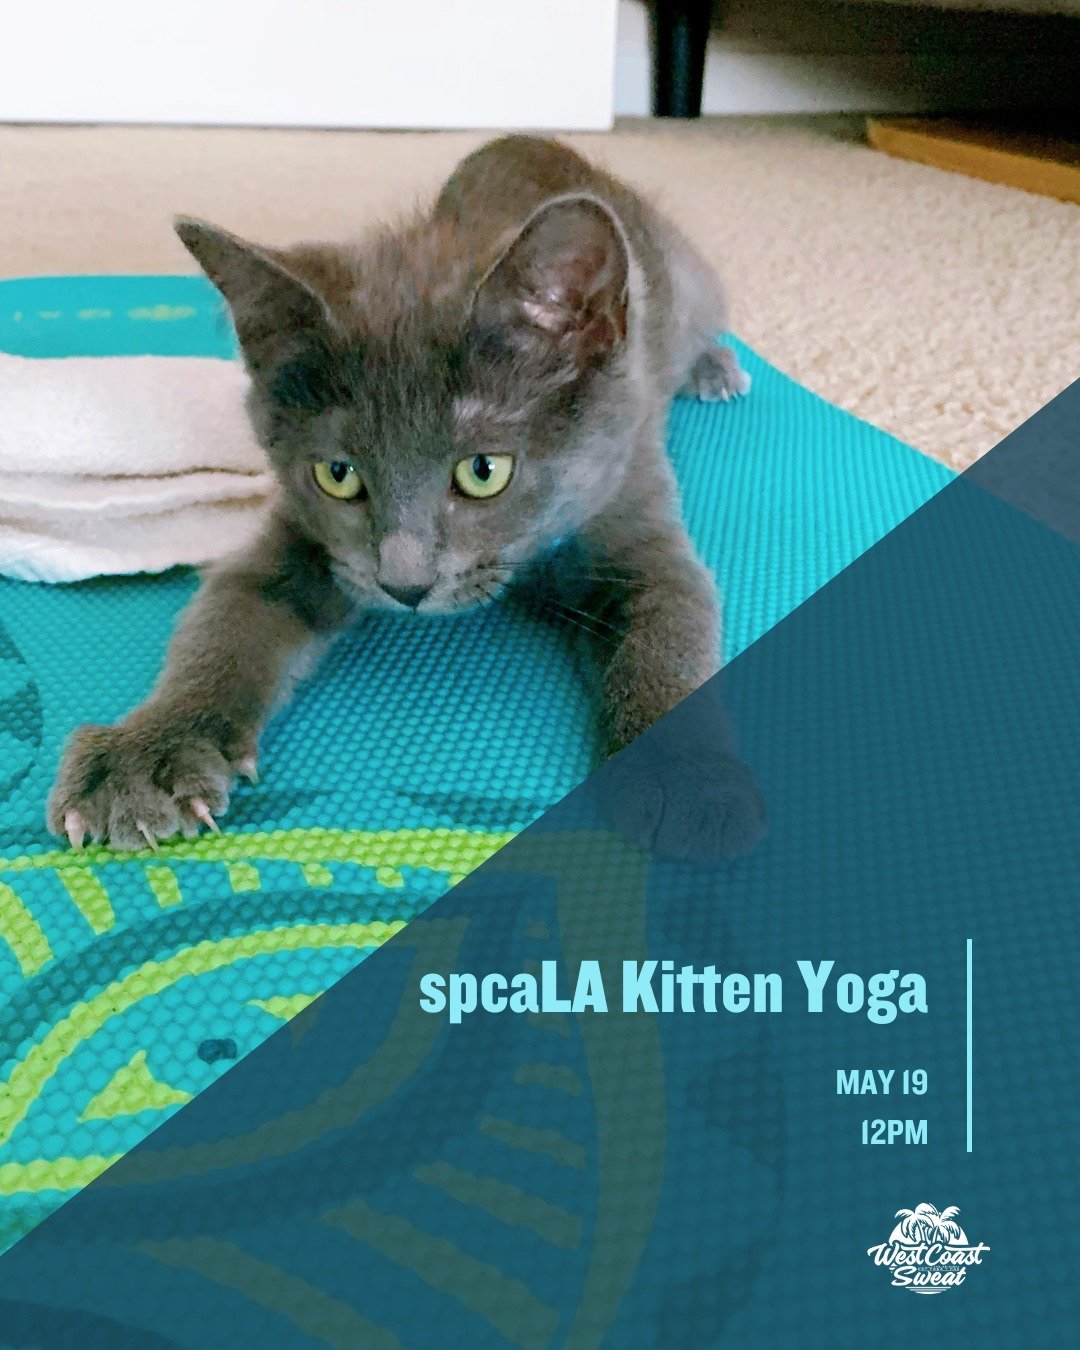 Looking for a unique way to unwind and connect with some of the cutest creatures? Come join us for a special yoga class in support of spcaLA.

🗓️ Sunday, May 19
⏰ 12pm
📍 West Coast Sweat Long Beach

During class, your furry friends will be close by